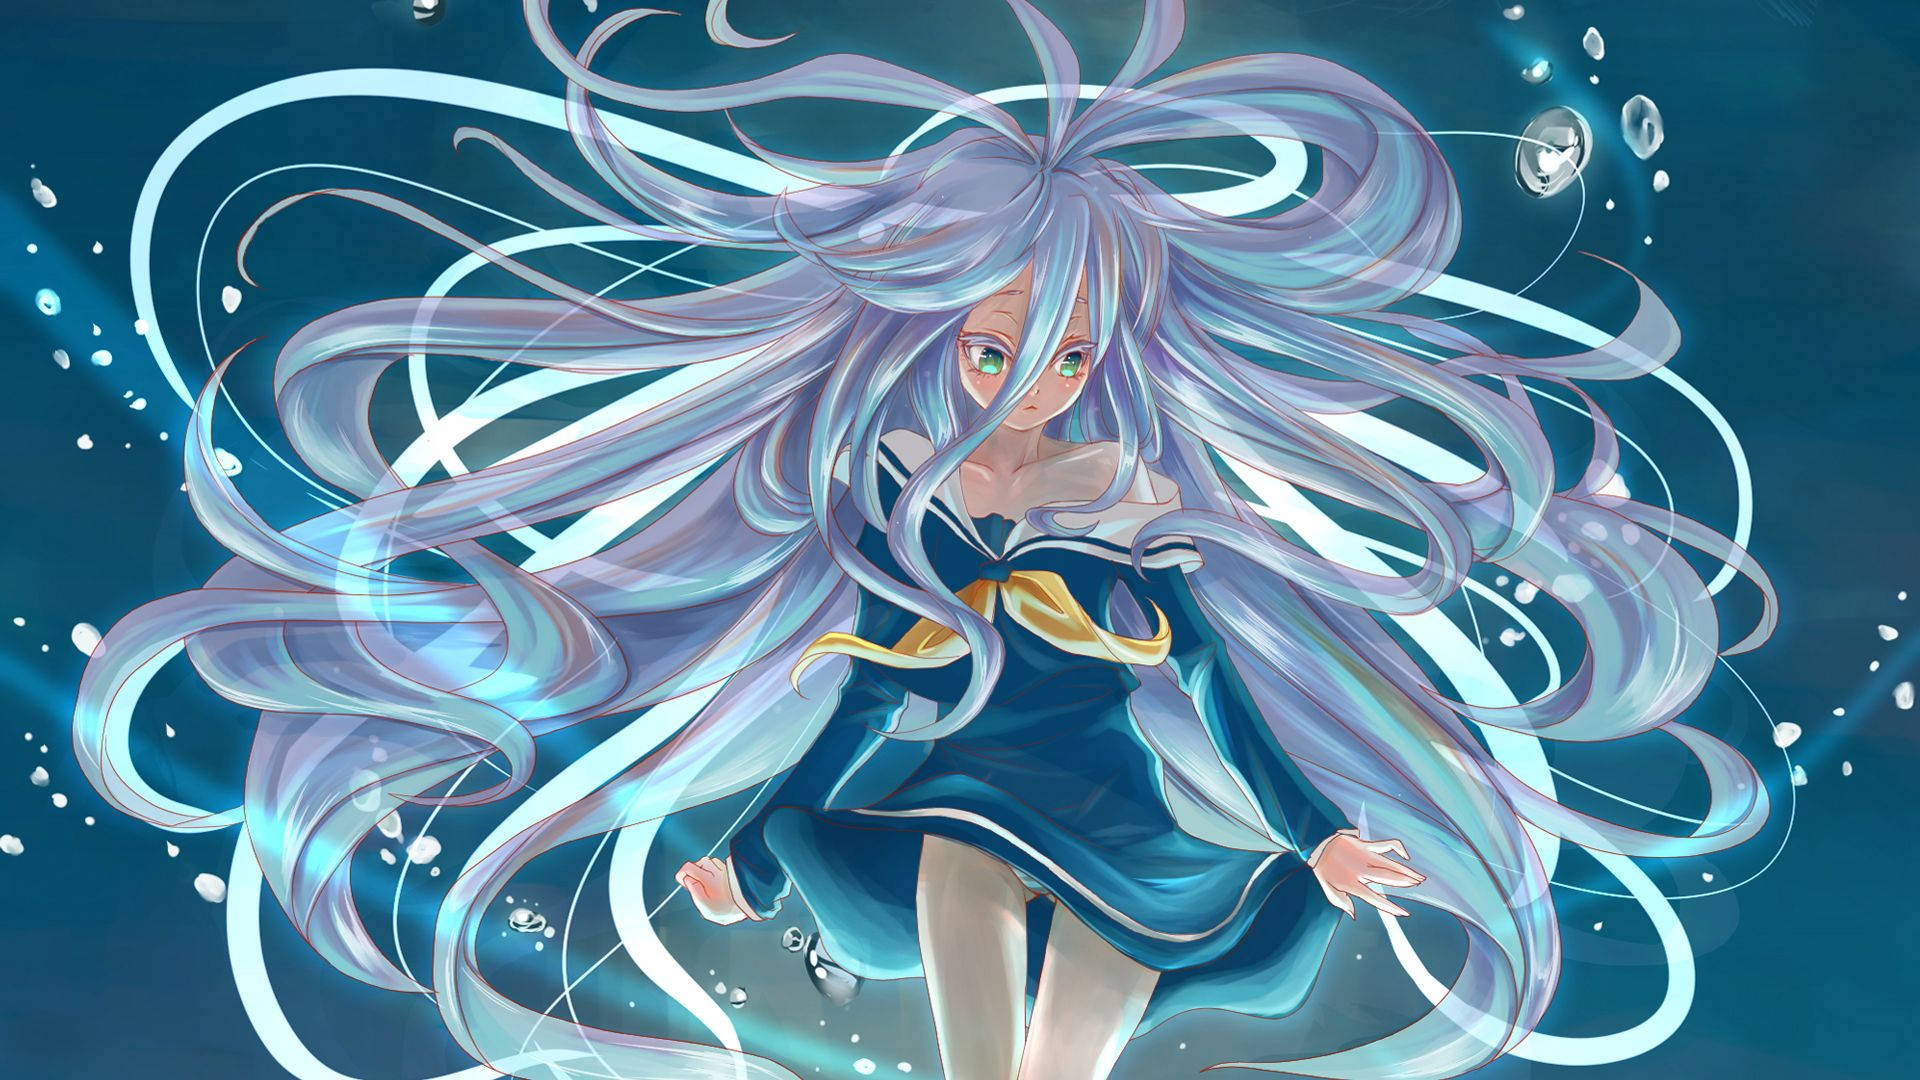 A moment of tranquility with Shiro from No Game No Life Wallpaper